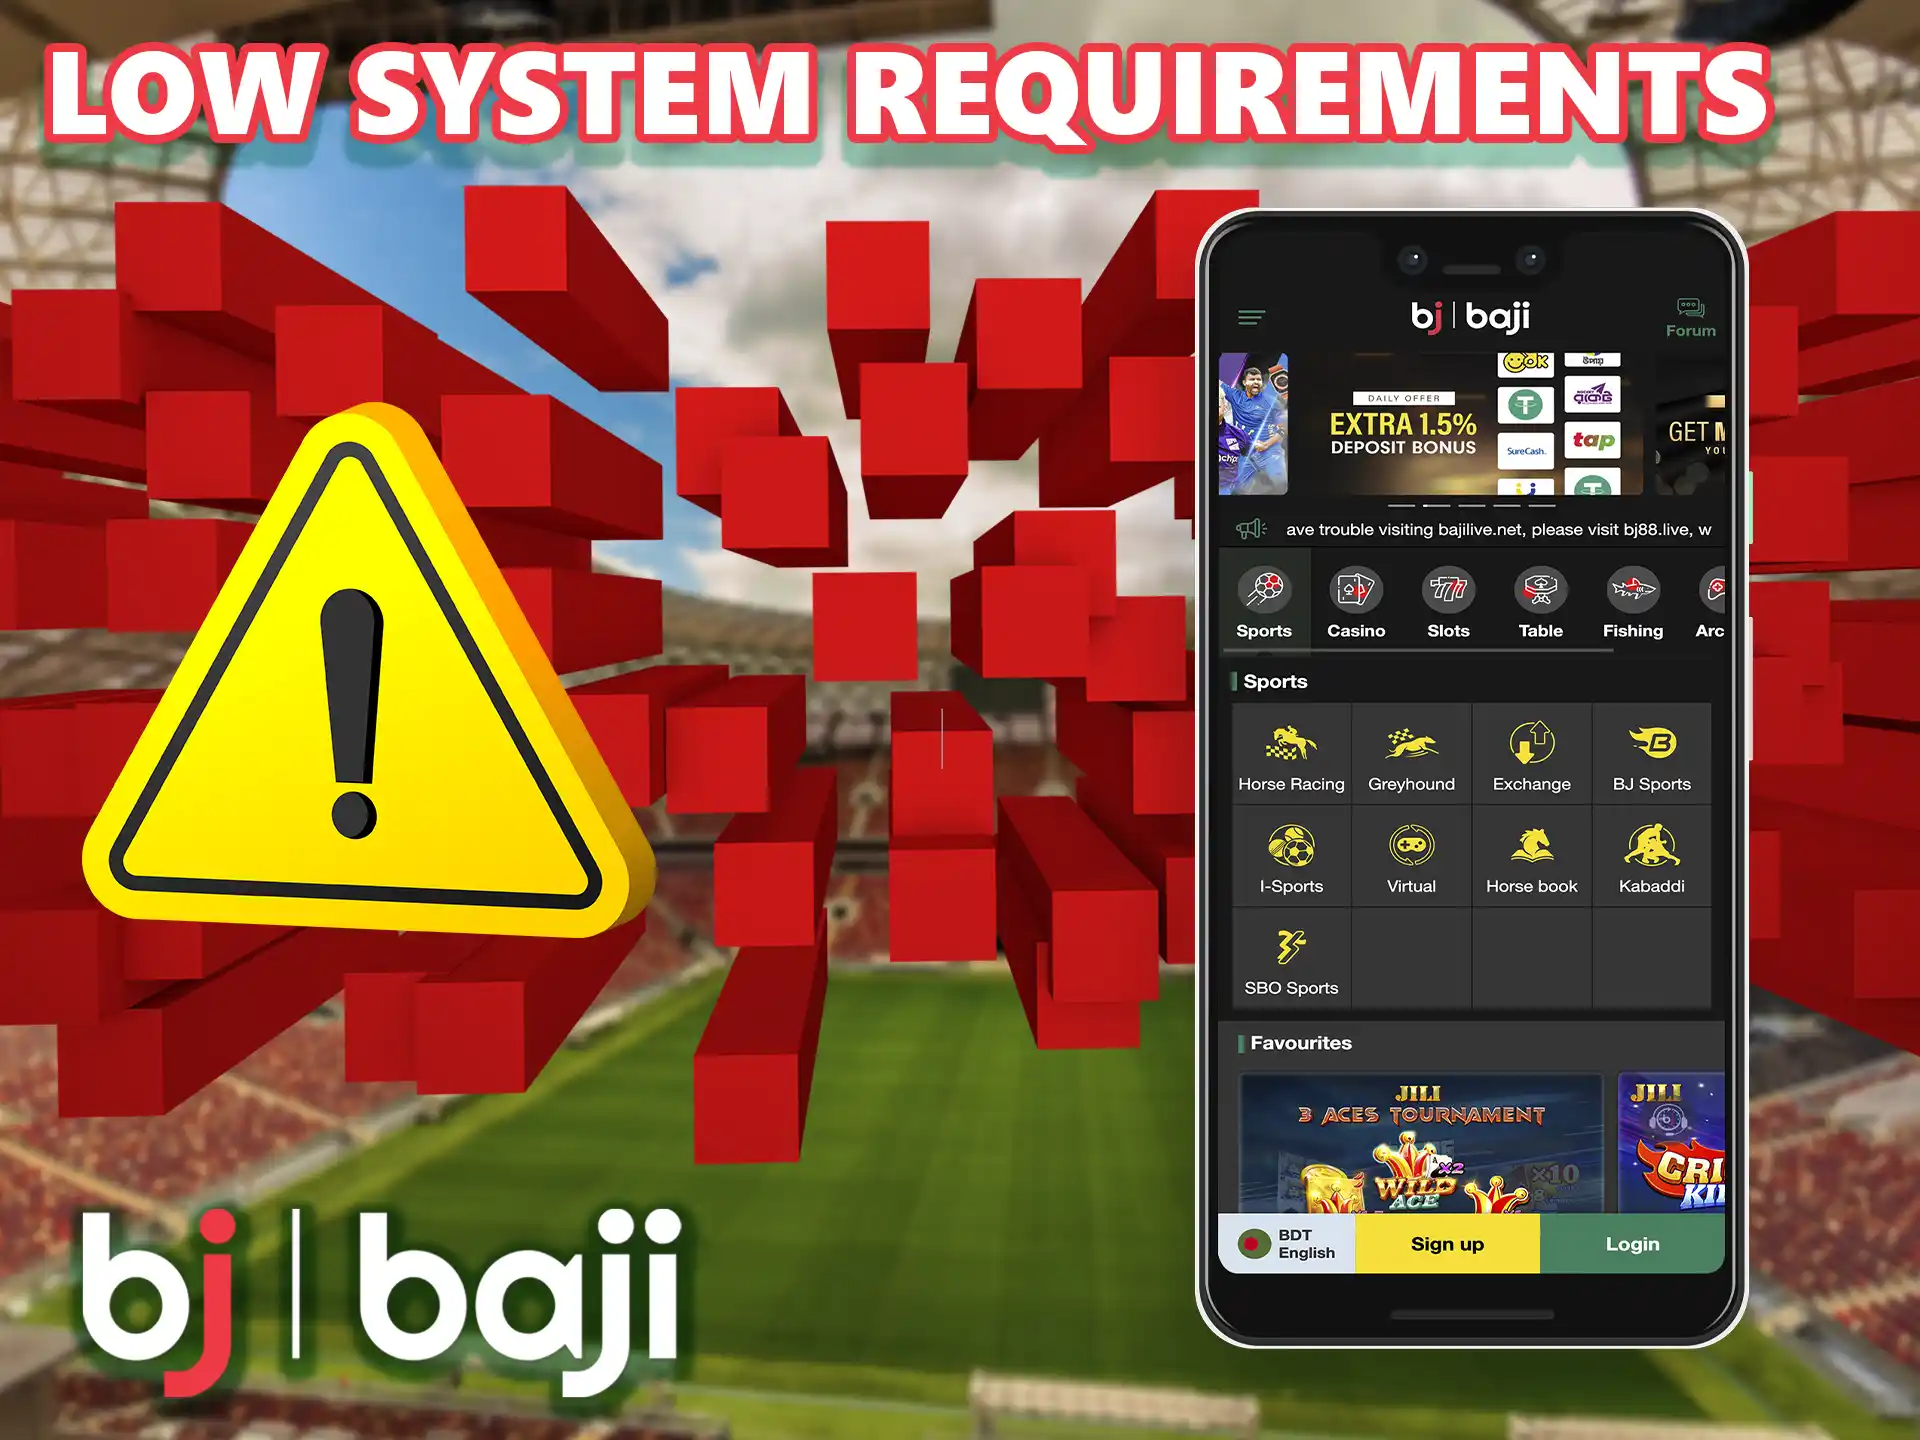 You don't have to worry about the technical specifications of your smartphone, the Baji app is not demanding on resources.